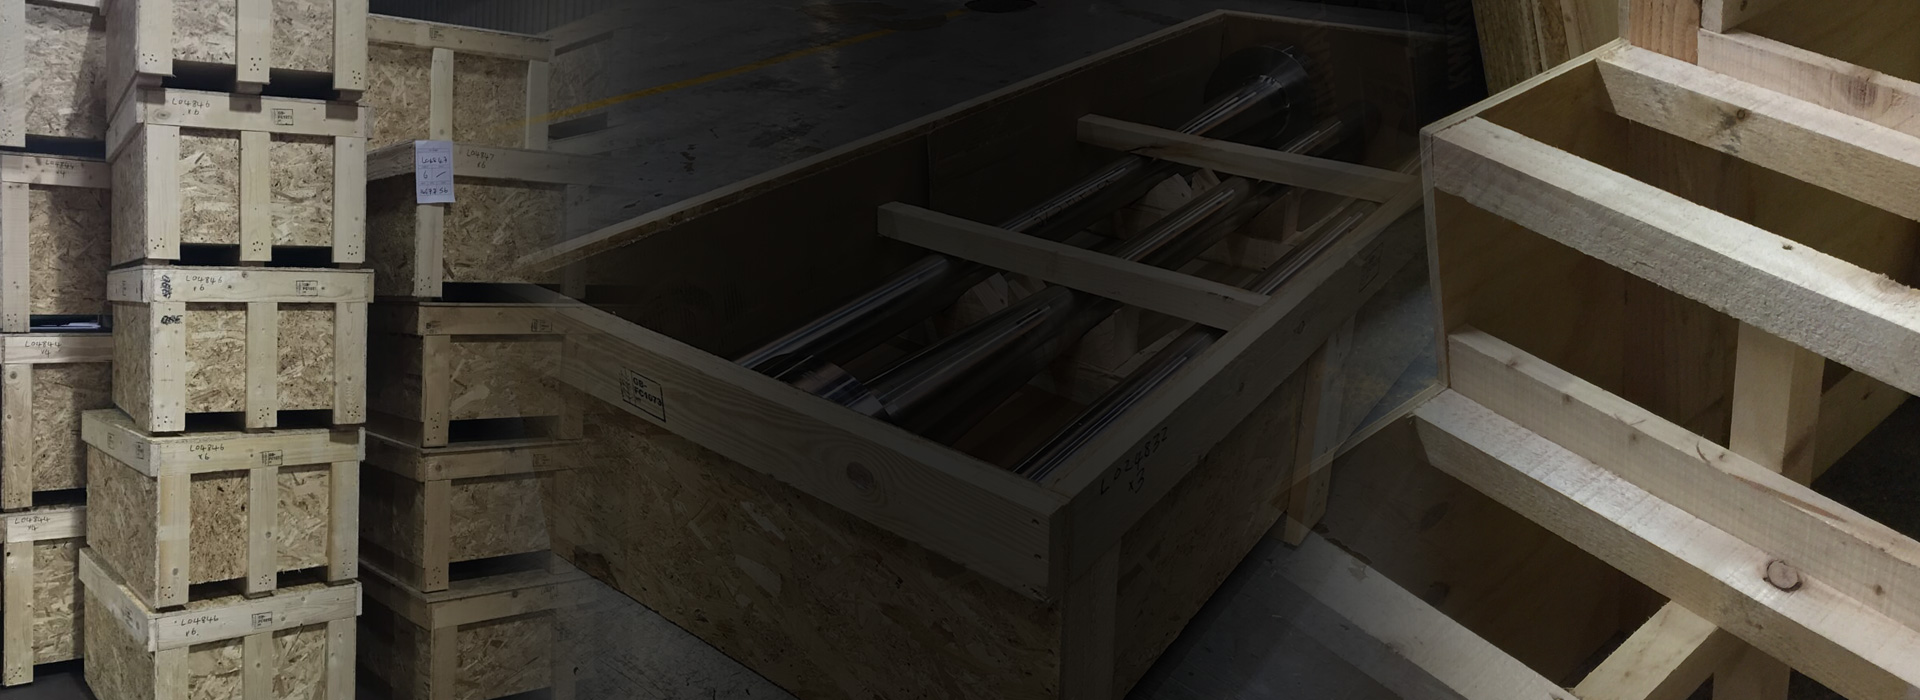 packing crates by Simply Crates